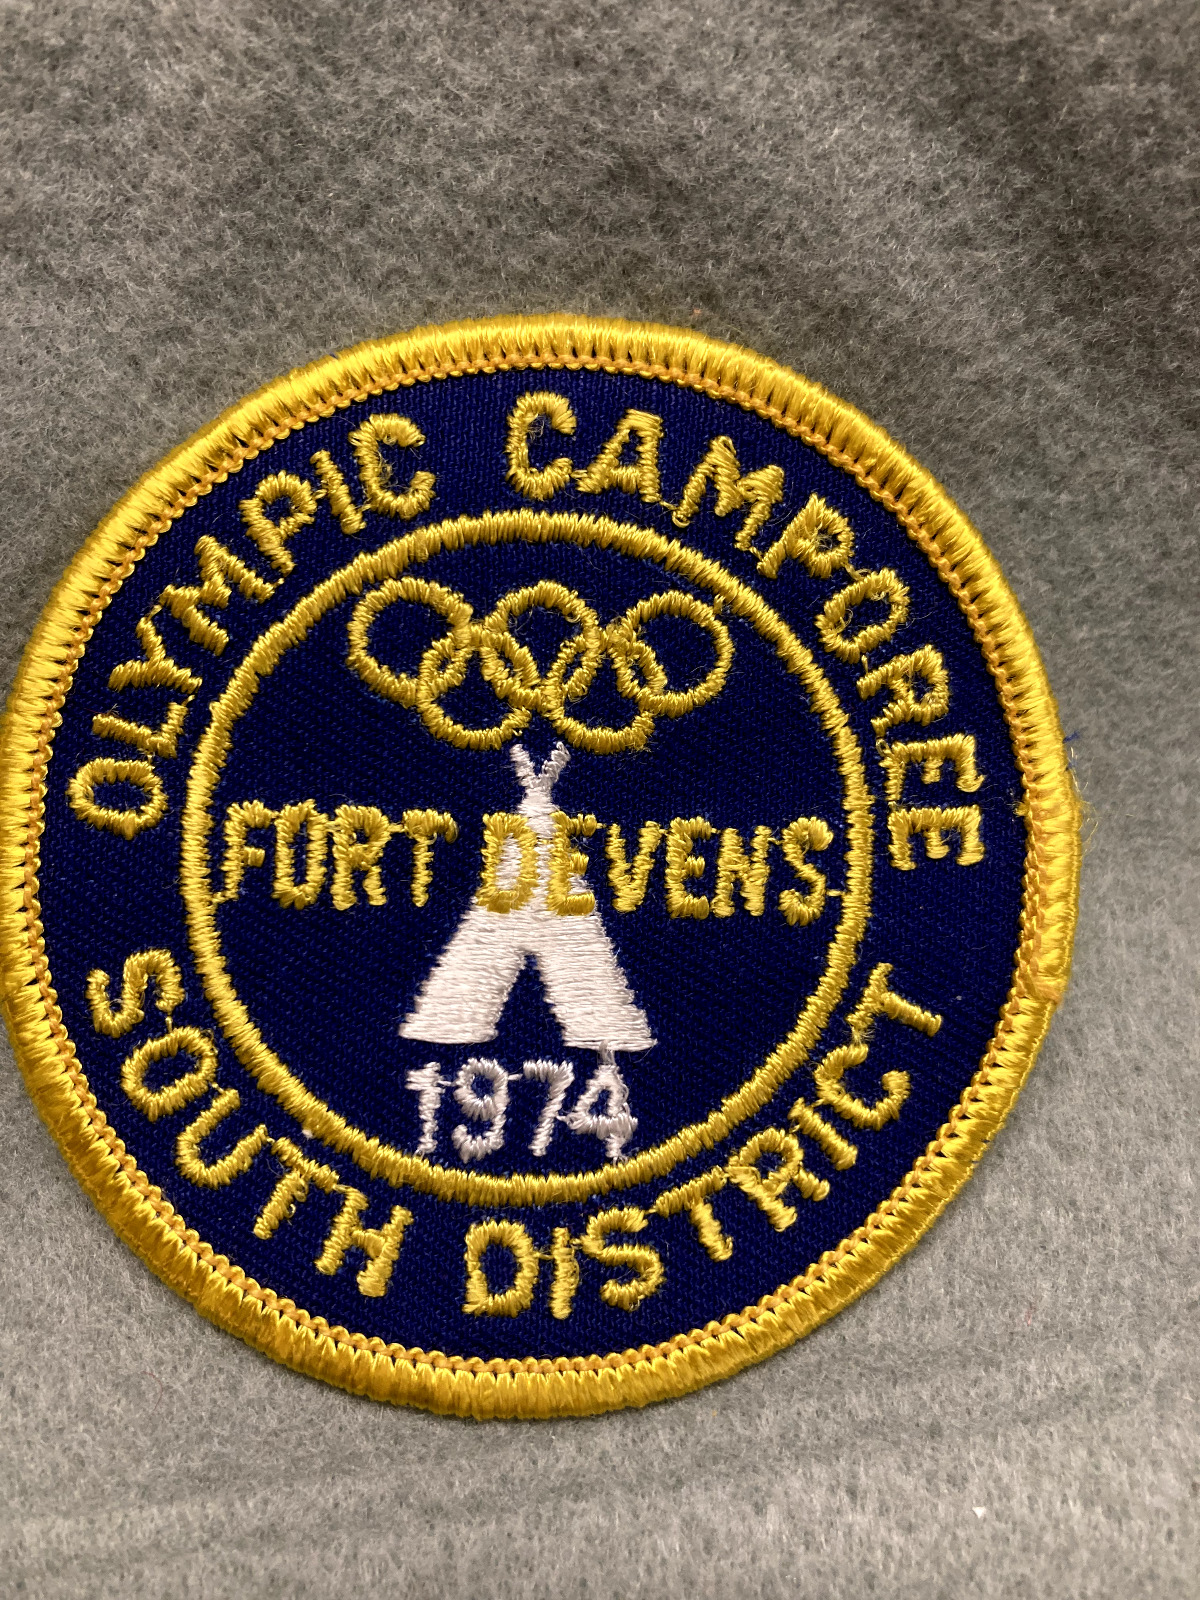 (123)   Boy Scouts / 1974 Olympic Camporee @ Fort Devens (MA)